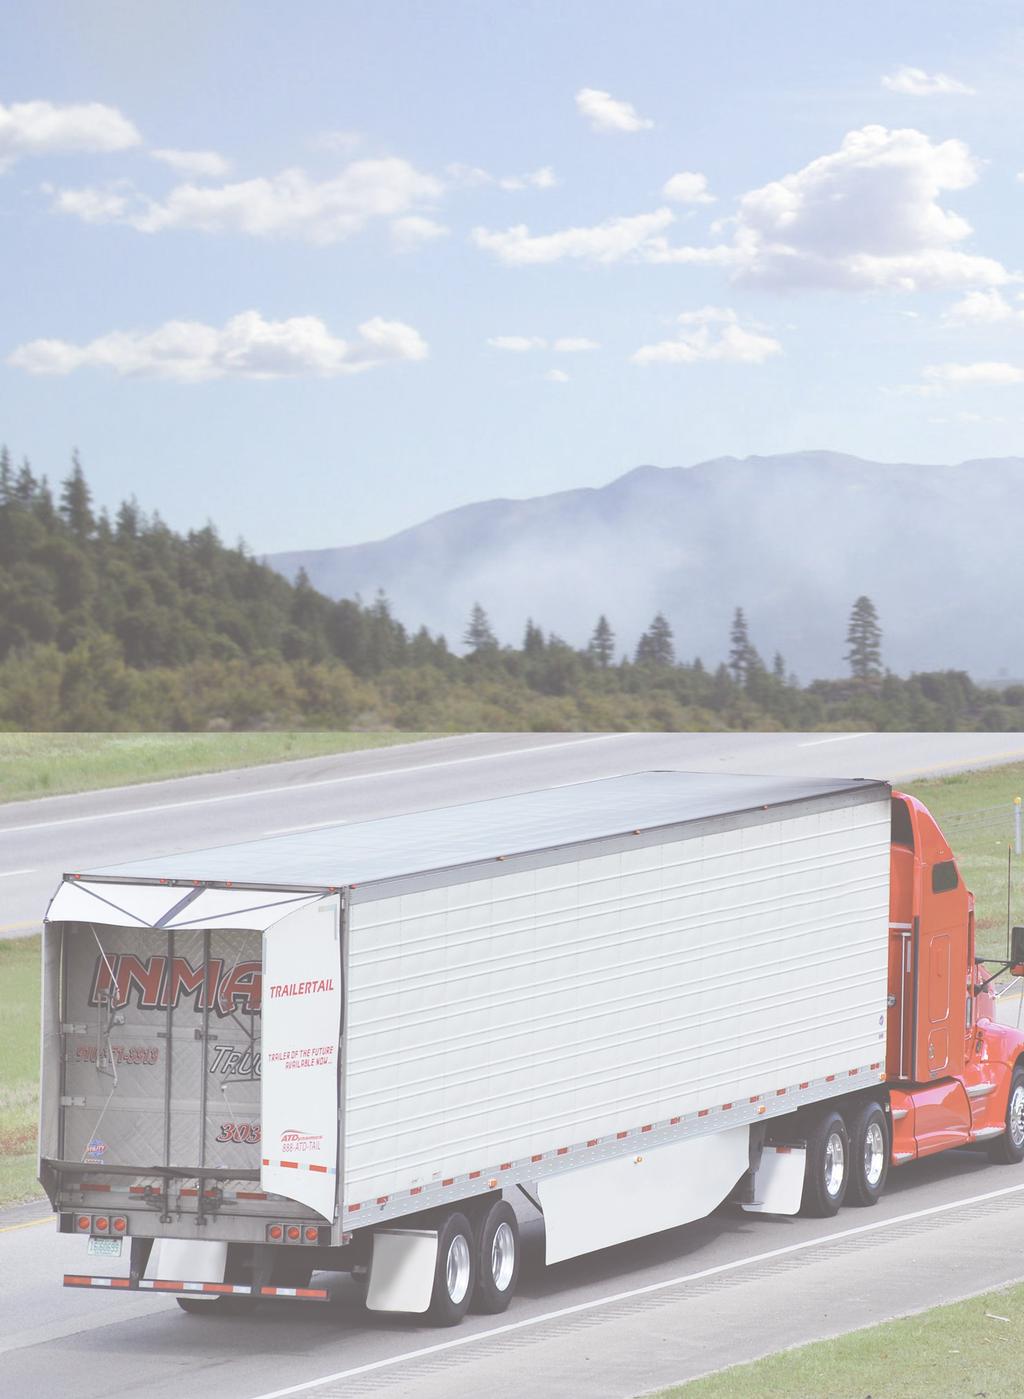 Advances in Efficiency, Safety Technology Set to Impact Trailer Design The classic trailer design of a long box on wheels hasn t changed in years.